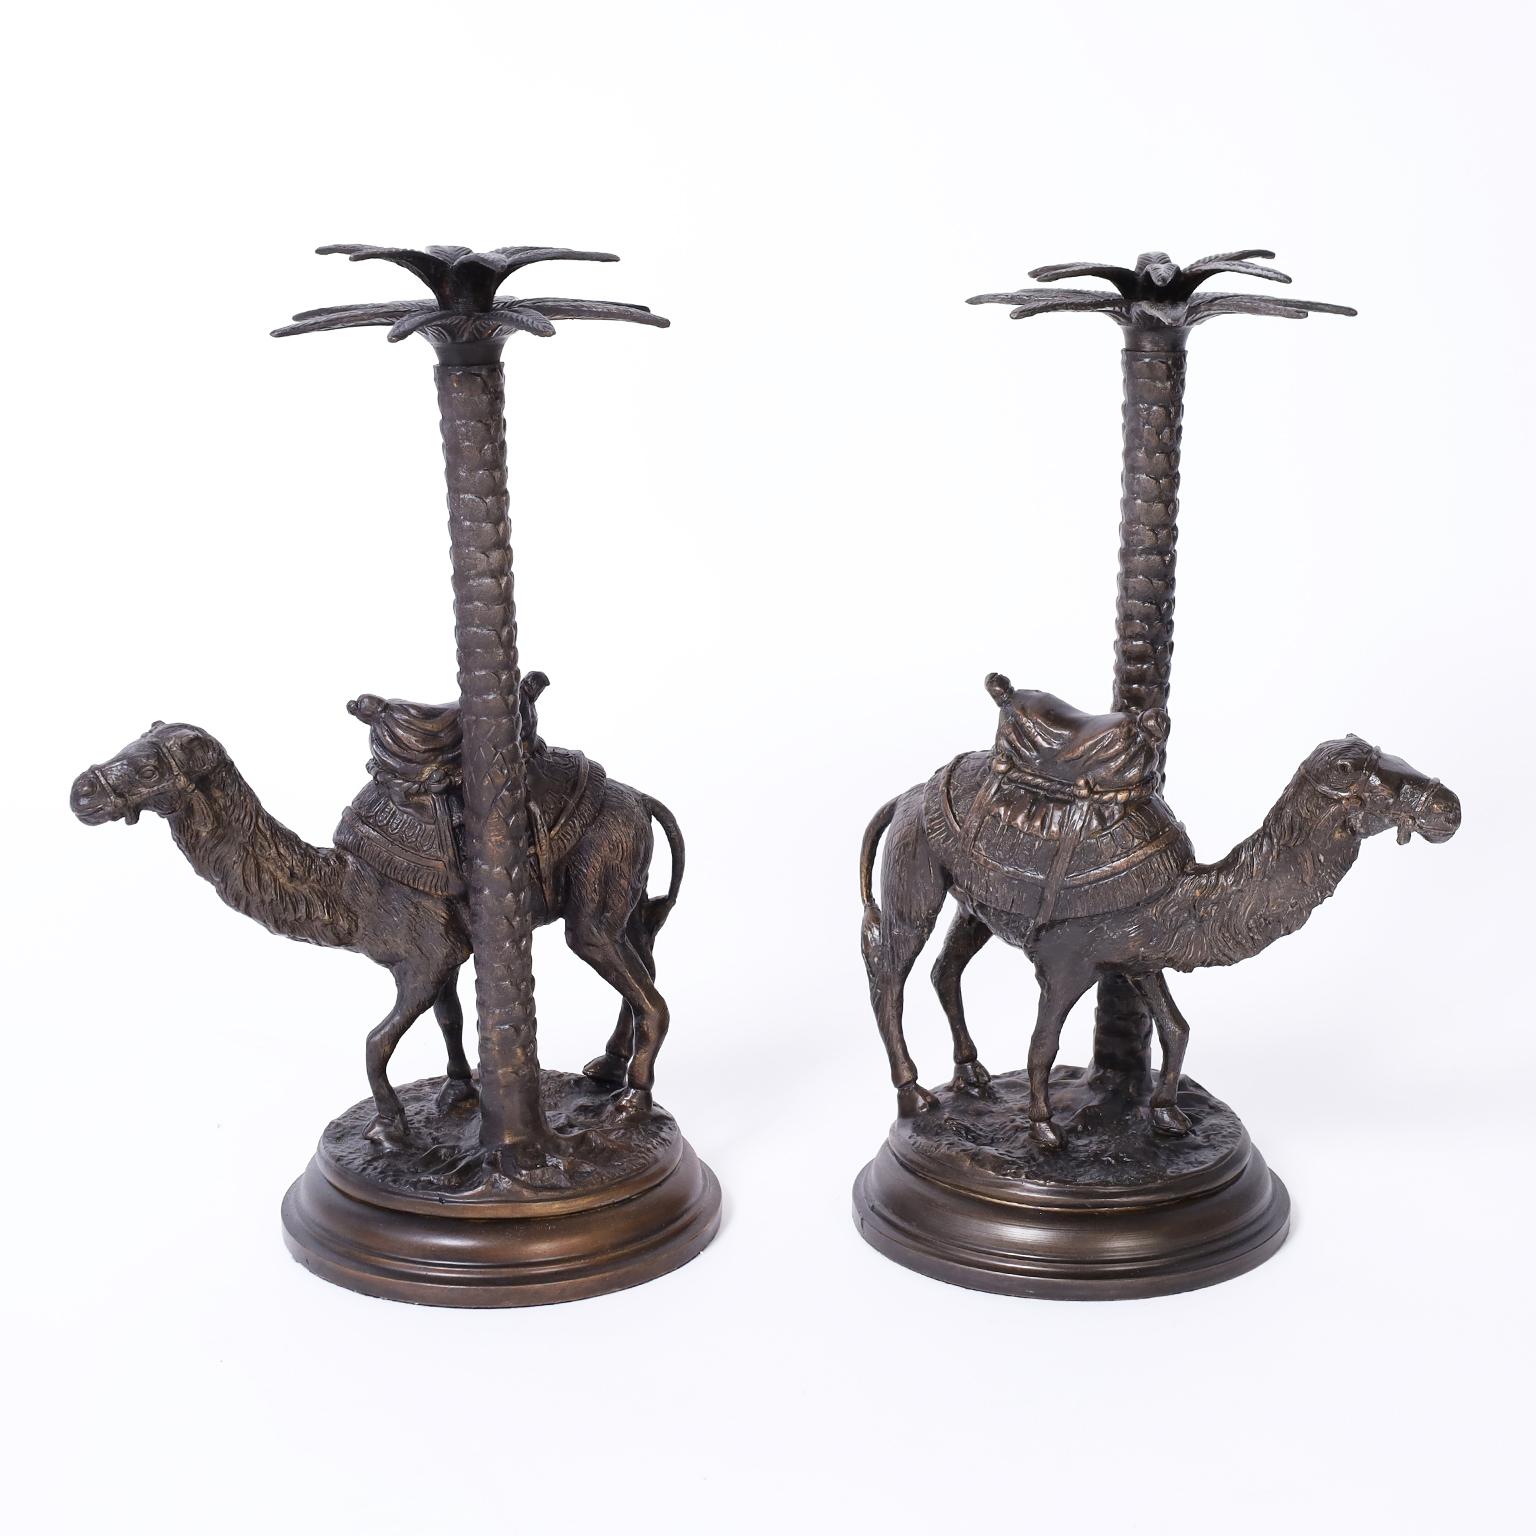 
Pair of British colonial style cast bronze candlesticks with palm tree candle holders over saddled camels on faux terra firma bases.
     